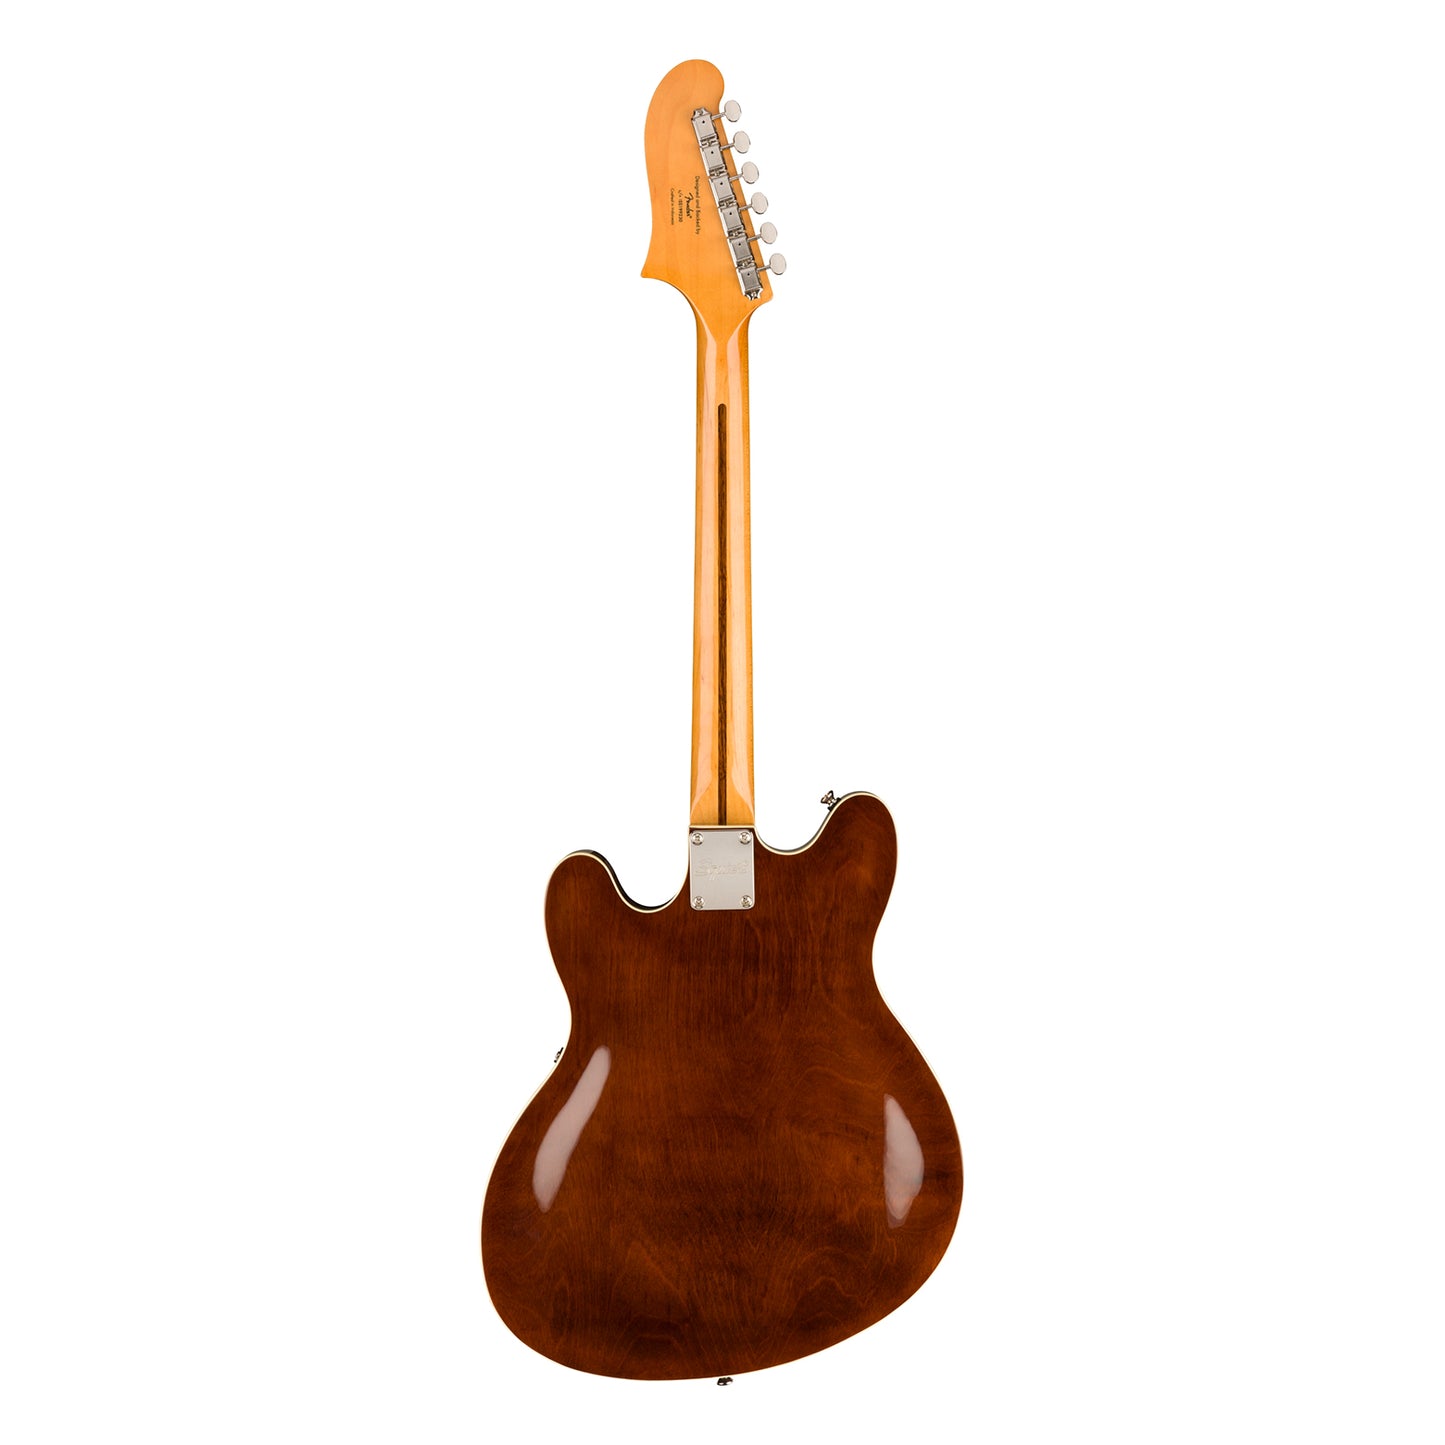 Squier by Fender Classic Vibe Starcaster Electric Guitar with HH Pickup, Semi Hollow Body, Maple Fingerboard, Adjustable Bridge (3-Color Sunburst, Natural, Walnut)